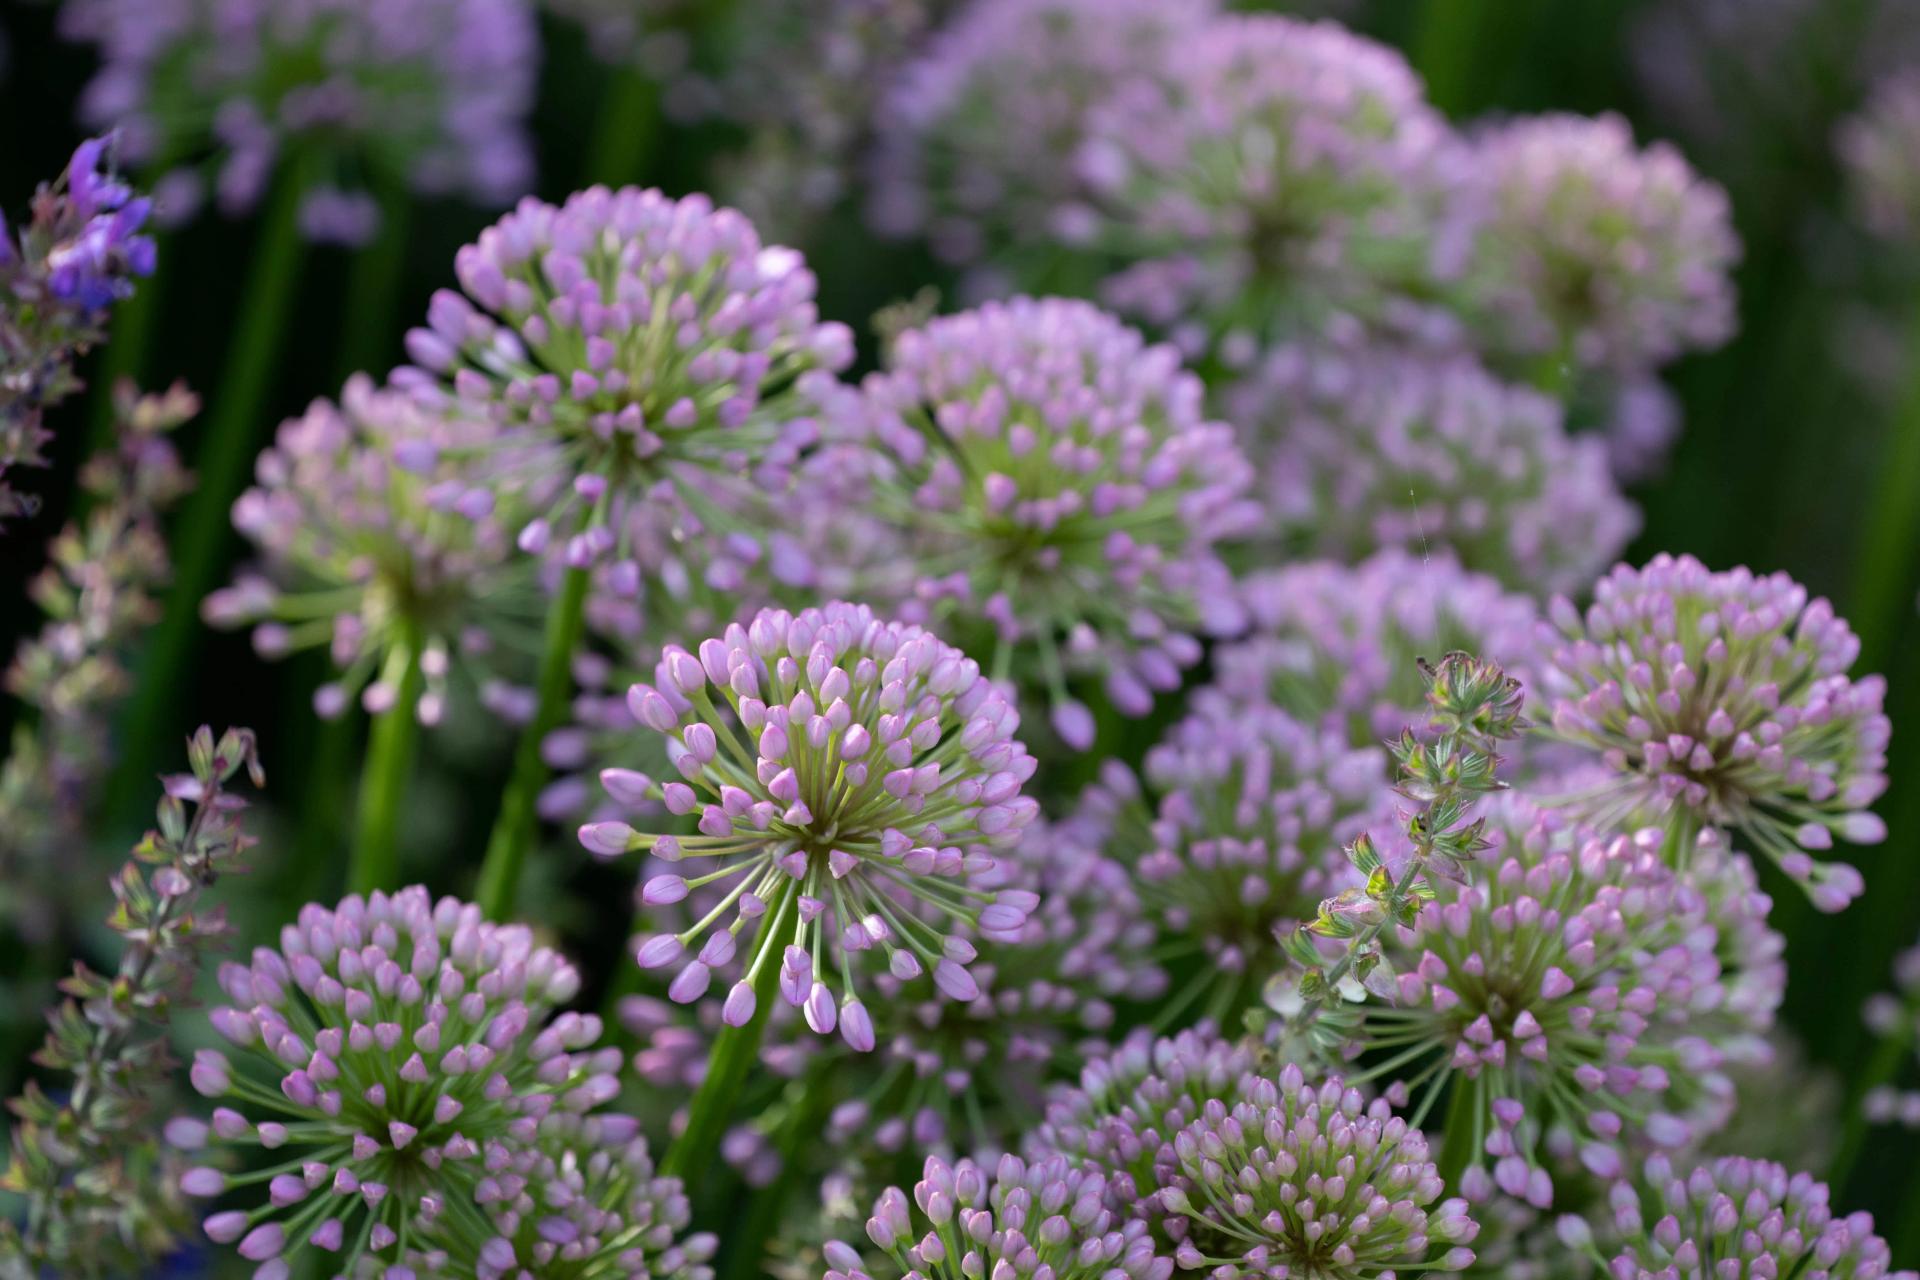 Alliums In The Morning Light